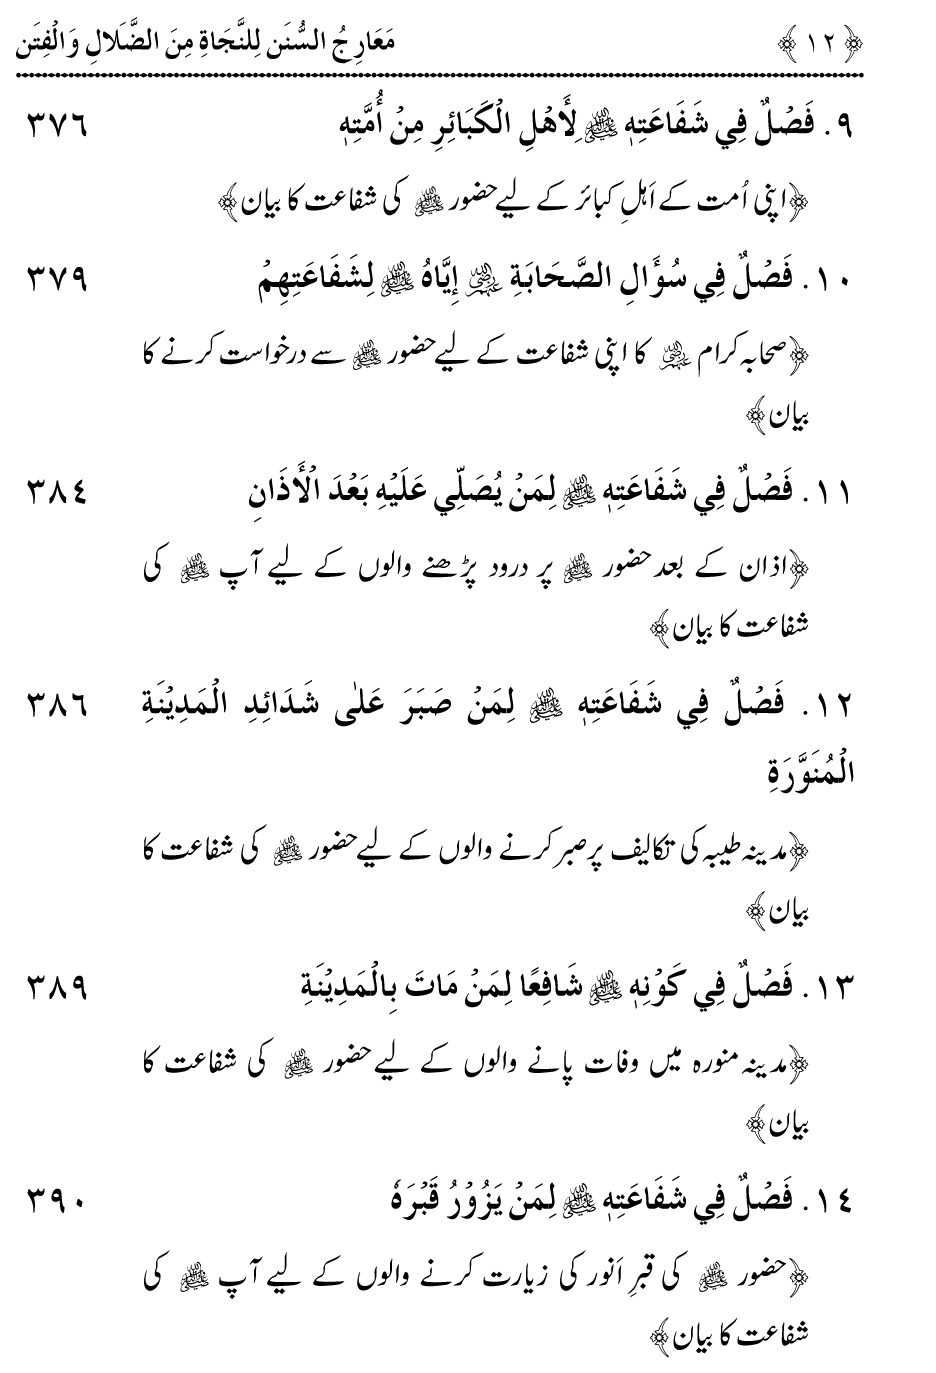 Ladders of Sunna for Deliverance from Deviation and Tribulations (Vol. 5)